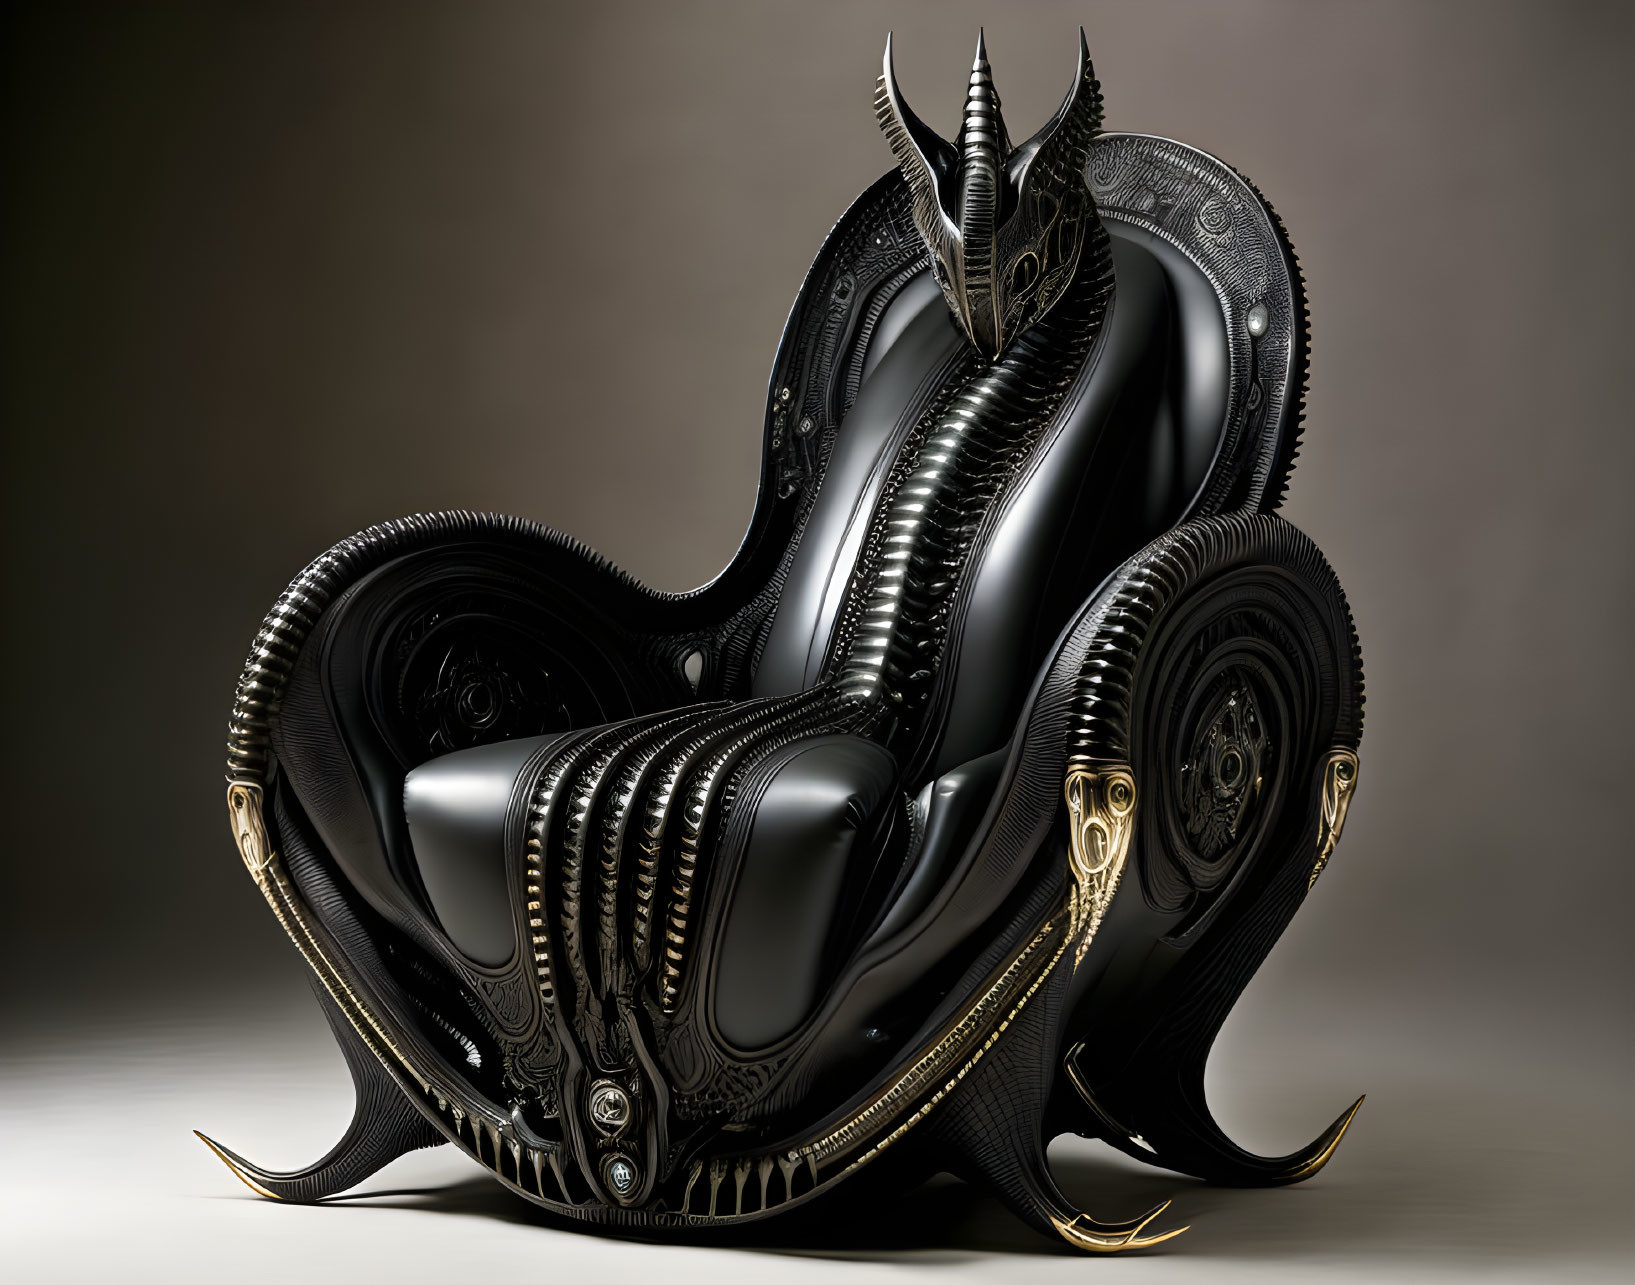 Black Armchair with Gold Accents and Horn-like High Back